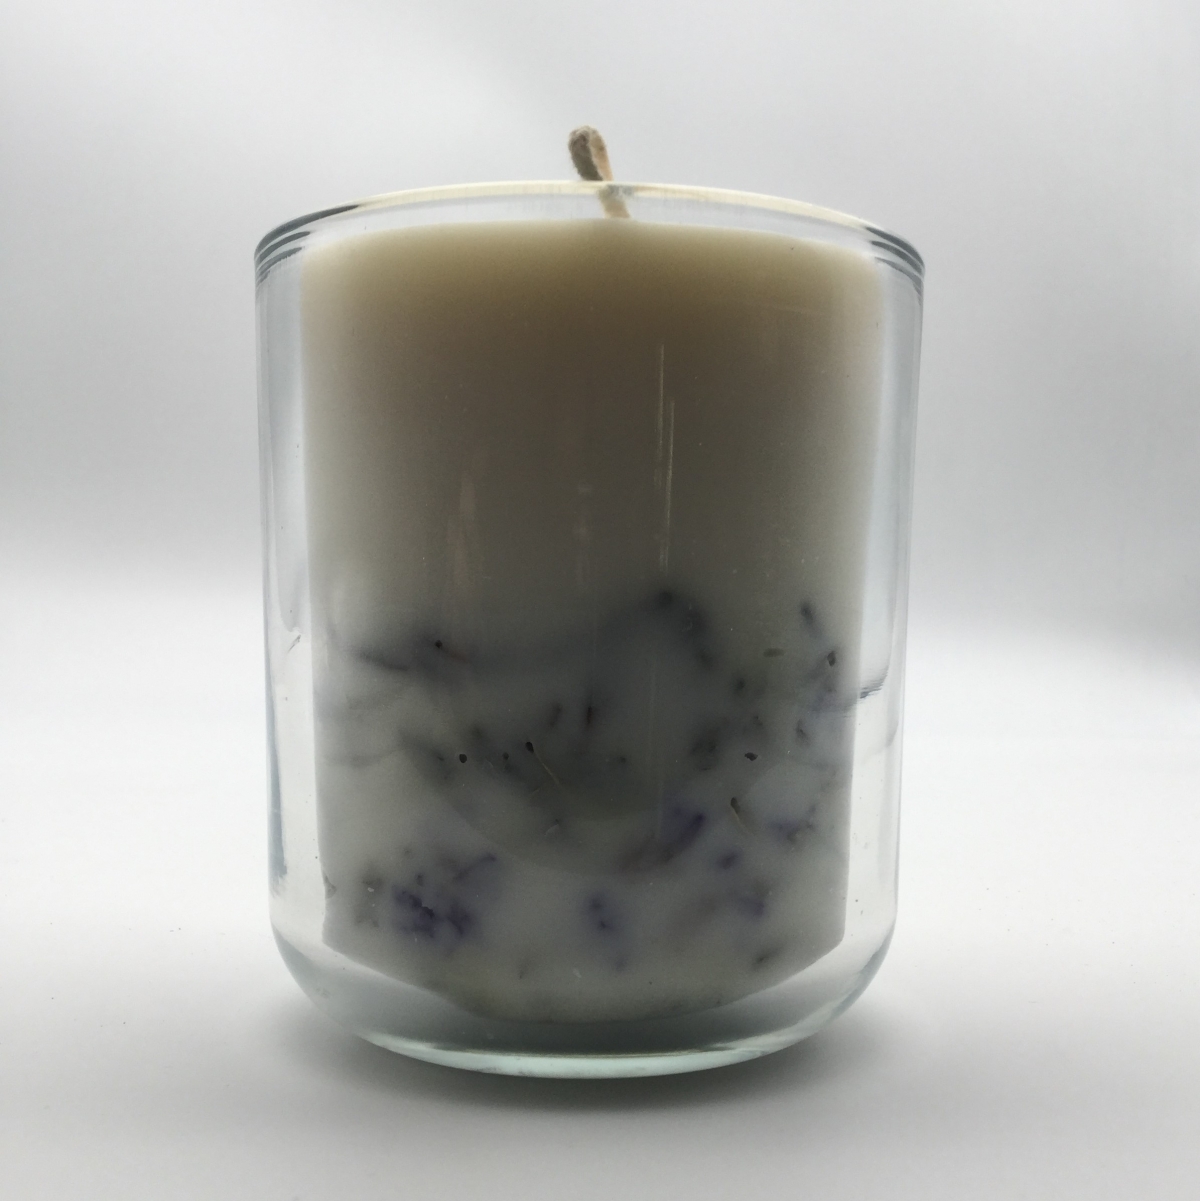 Scented Candles :Soy Wax, Lavender, Dried Flower Candles, China Factory ,Wholesale ,Price-HOWCANDLE-Candles,Scented Candles,Aromatherapy Candles,Soy Candles,Vegan Candles,Jar Candles,Pillar Candles,Candle Gift Sets,Essential Oils,Reed Diffuser,Candle Holder,